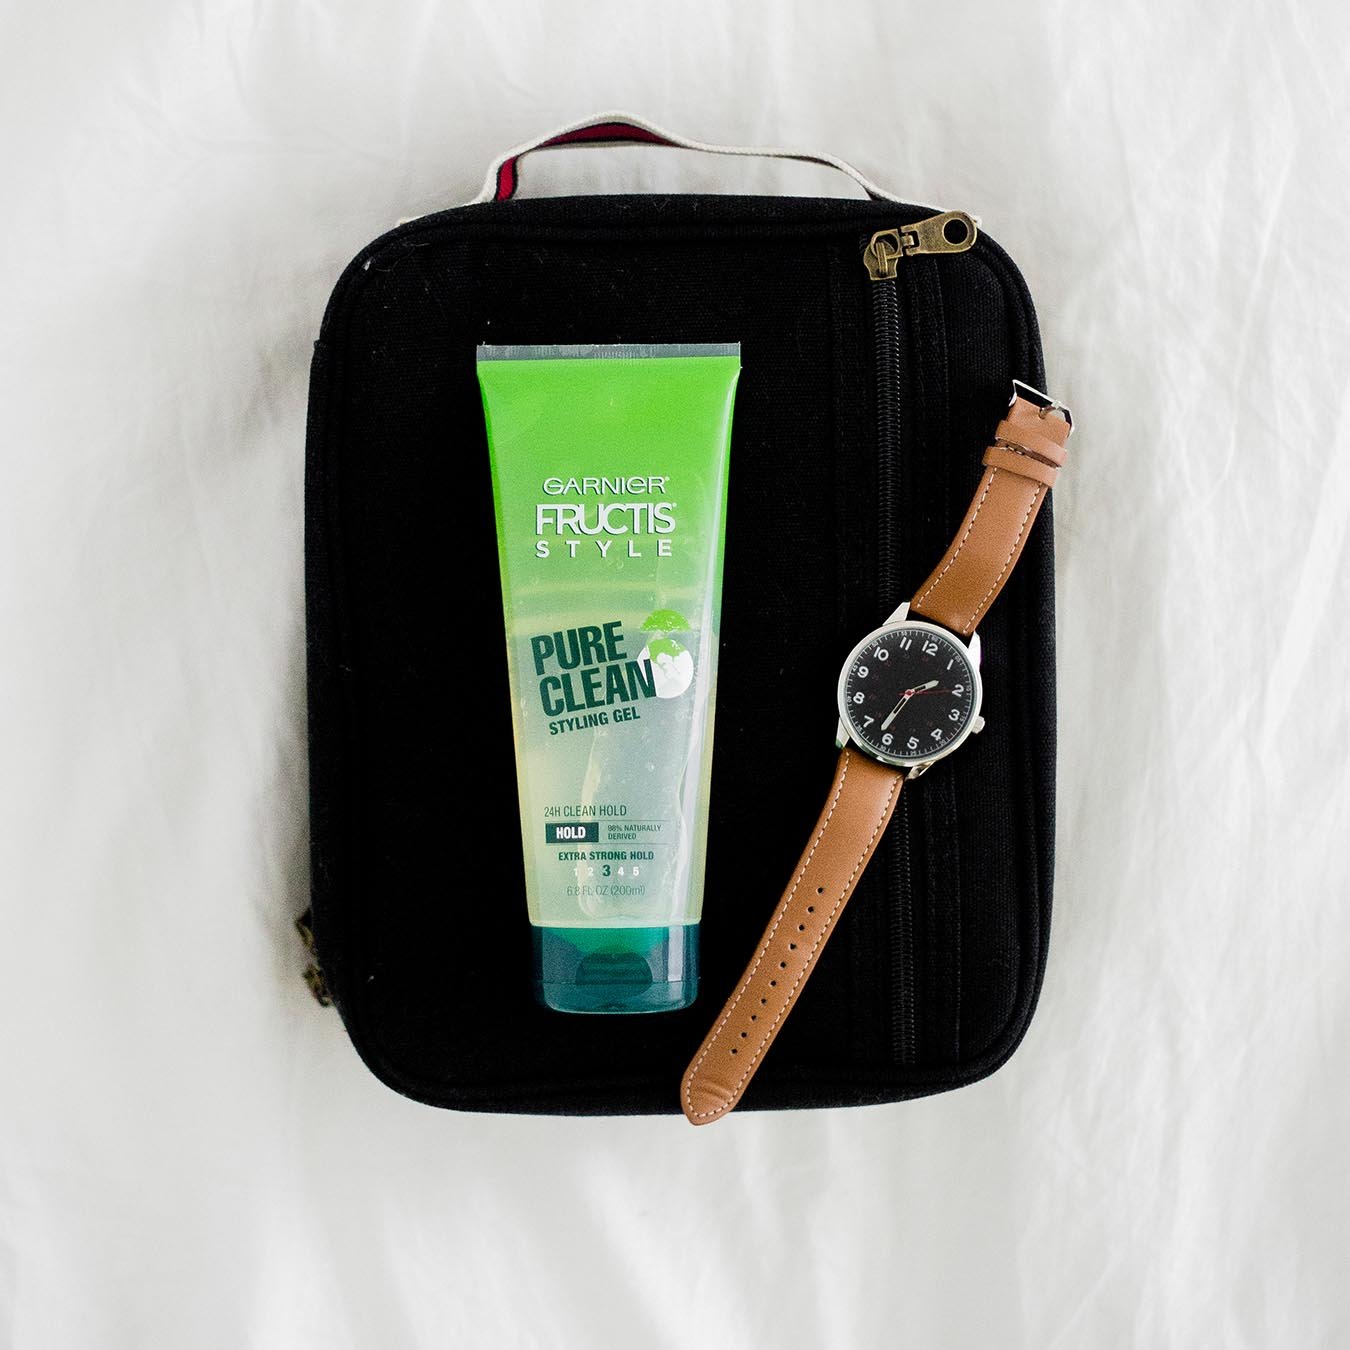 Garnier Fructis Style Pure Clean Styling Gel next to a watch with a black face and brown band on a black travel bag on white cloth.